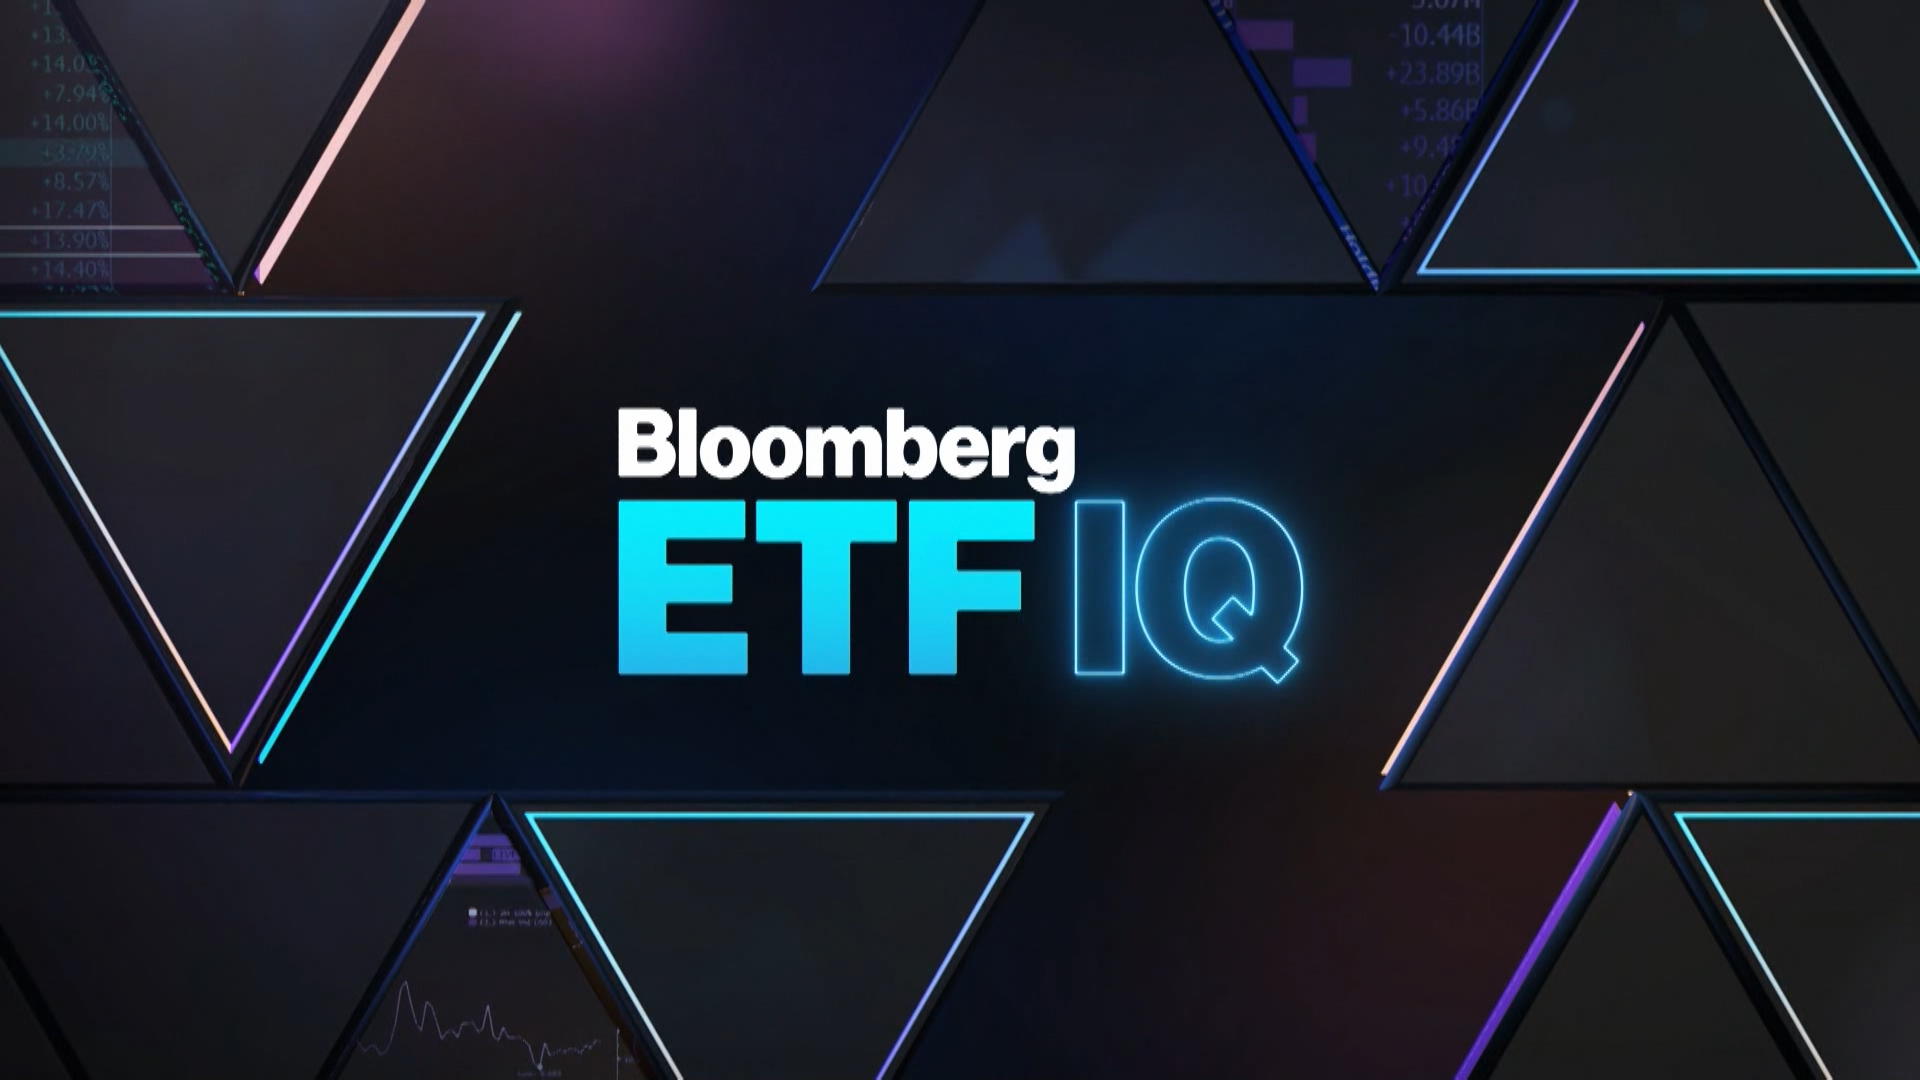 Bloomberg Etf Iq Full Show 05 29 2019 Bloomberg Images, Photos, Reviews